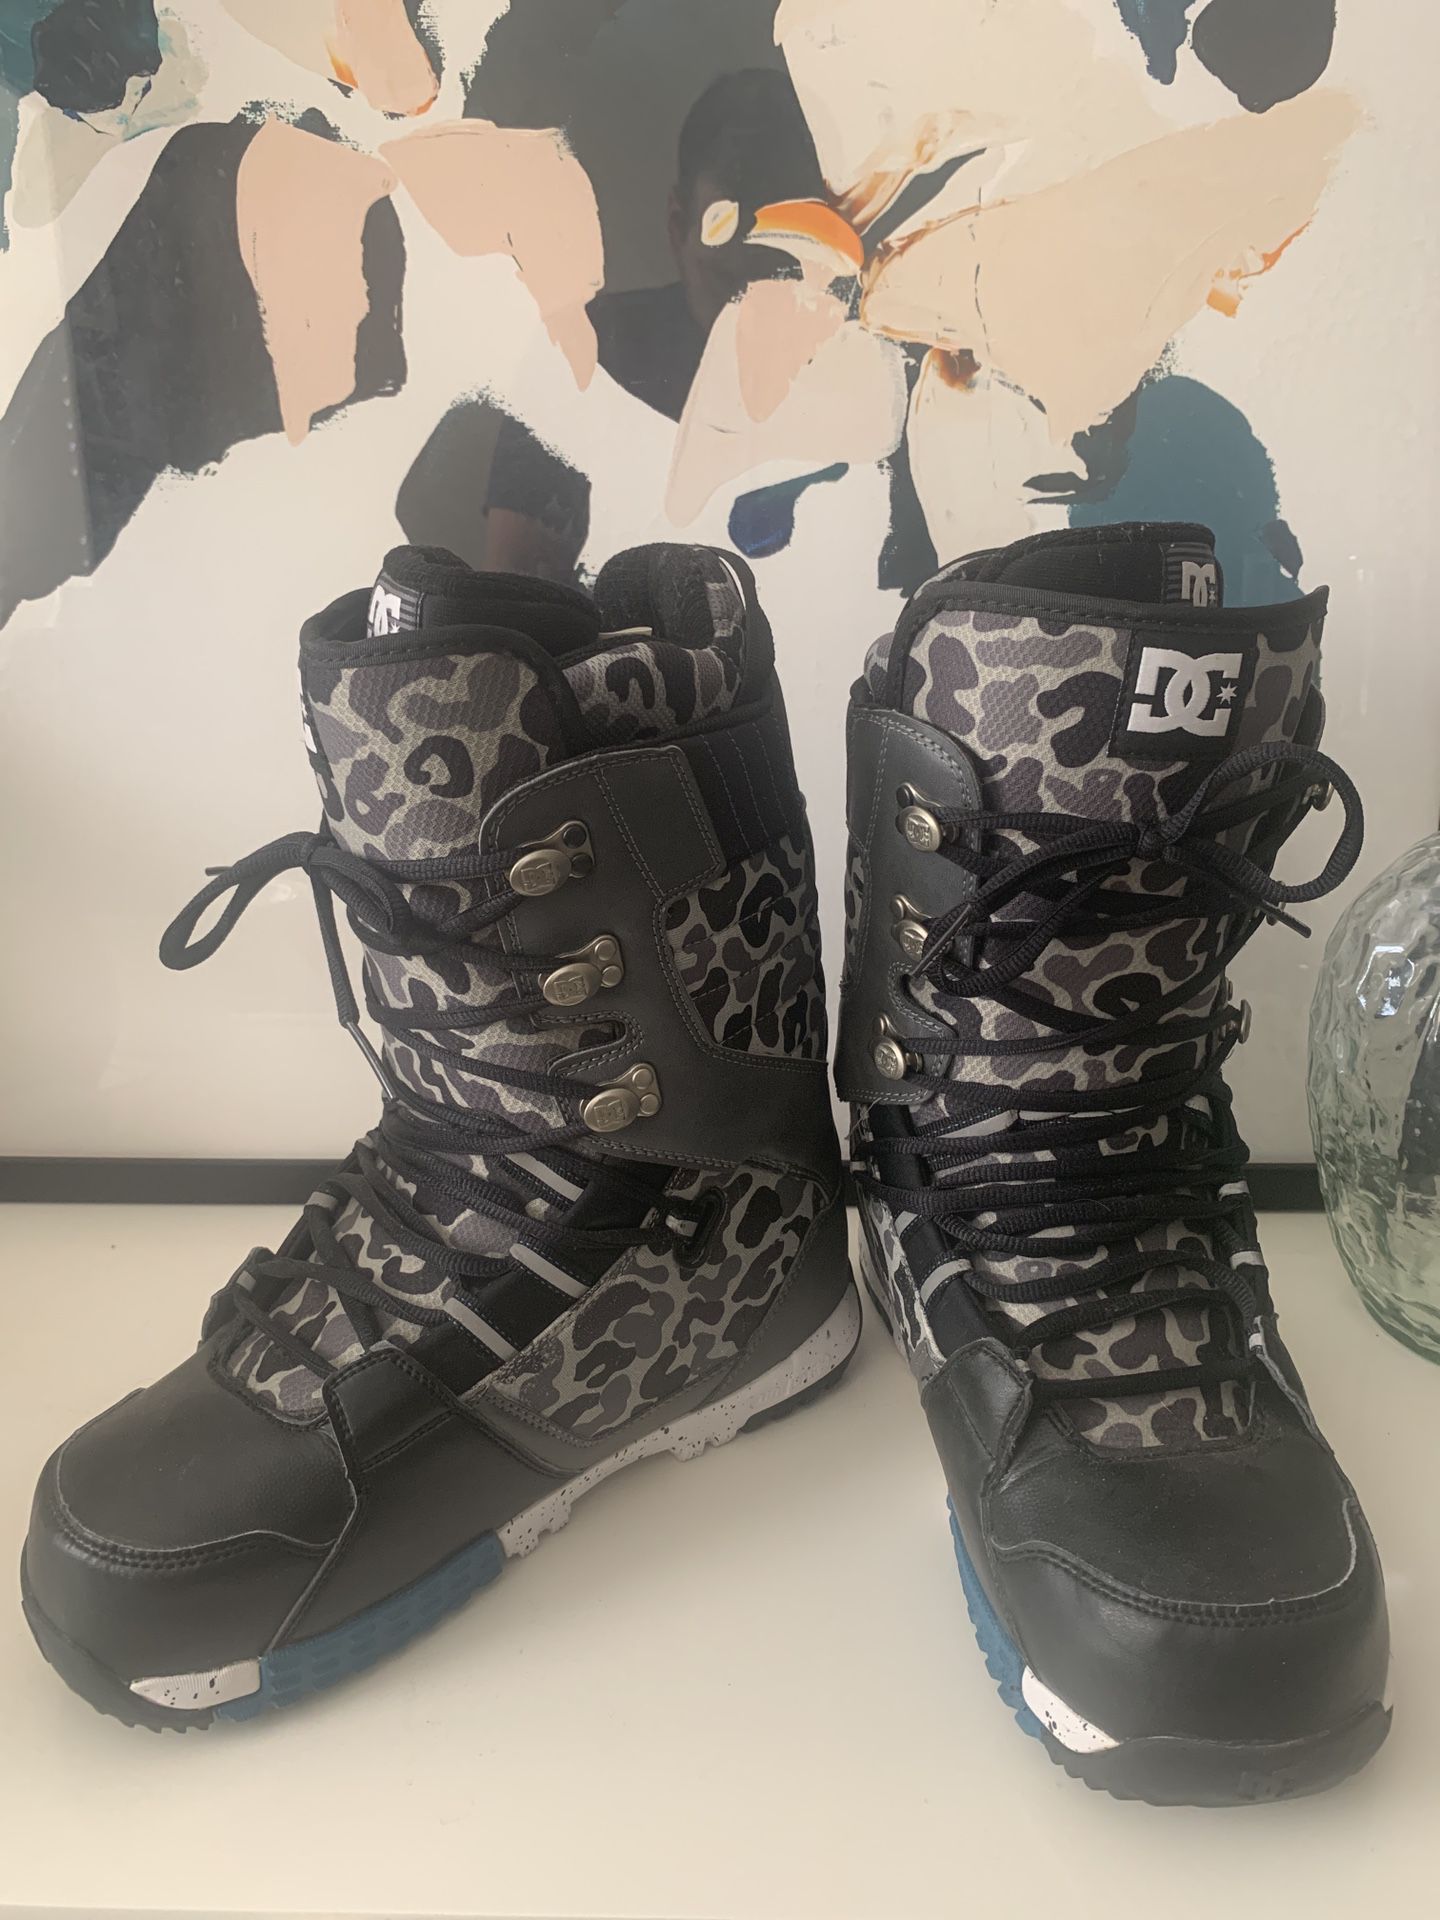 DC SNOWBOARD BOOTS SIZE 11 LIKE NEW, fits like a 10